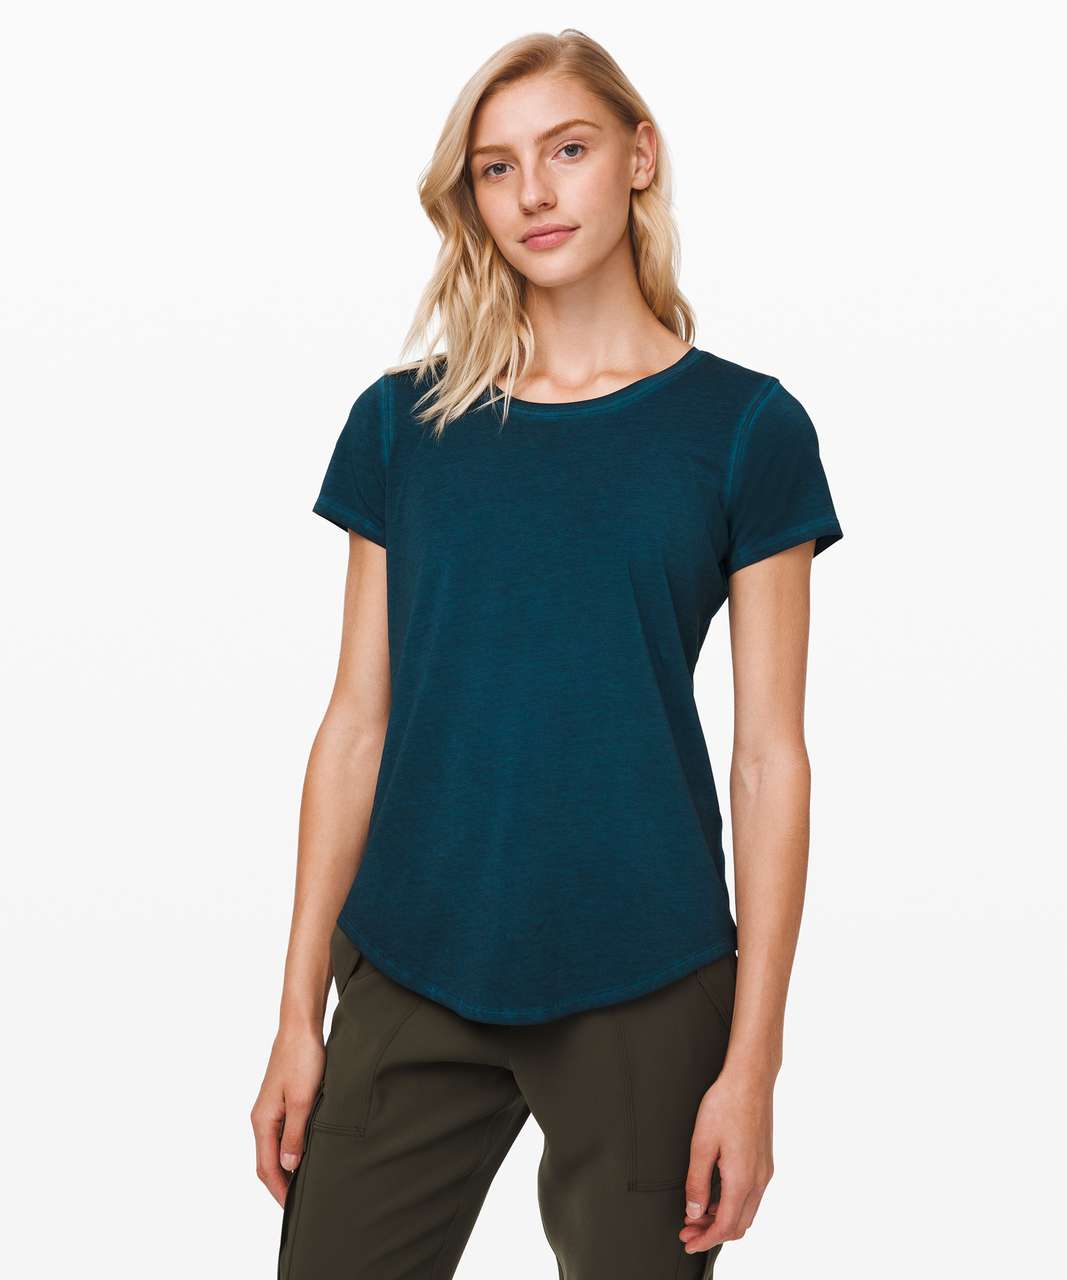 Lululemon Love Crew *Fade - Washed Night Diver